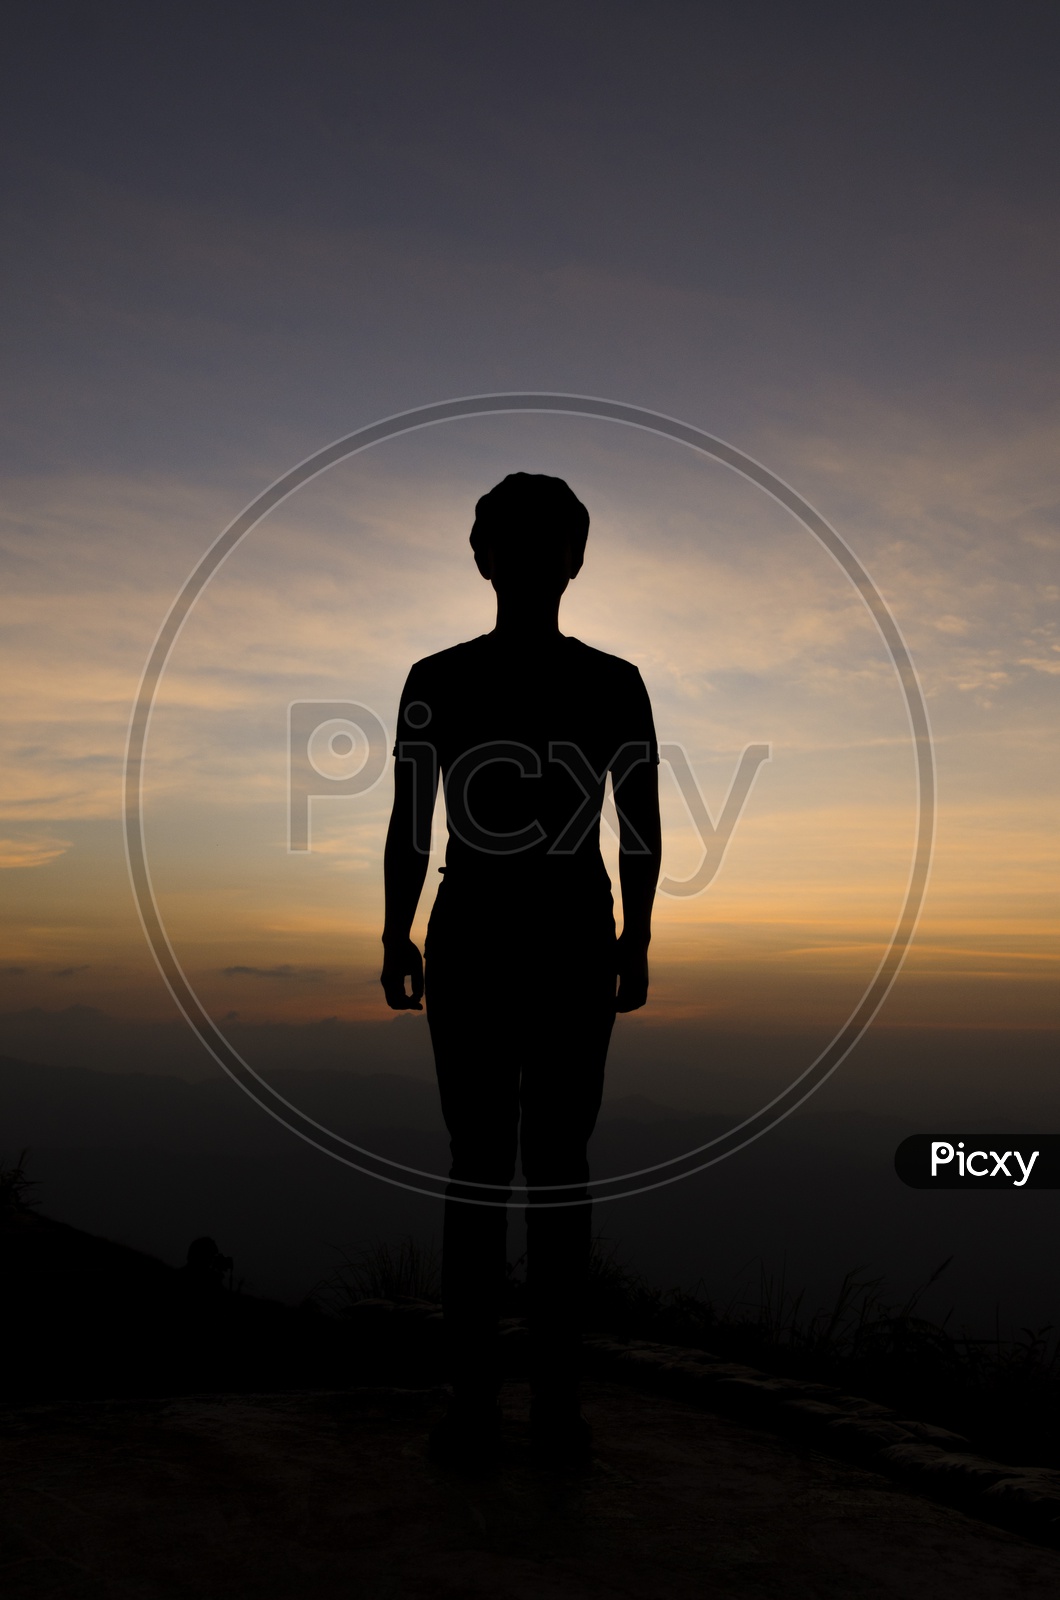 Silhouette of a Young Boy Over Sunset Sky